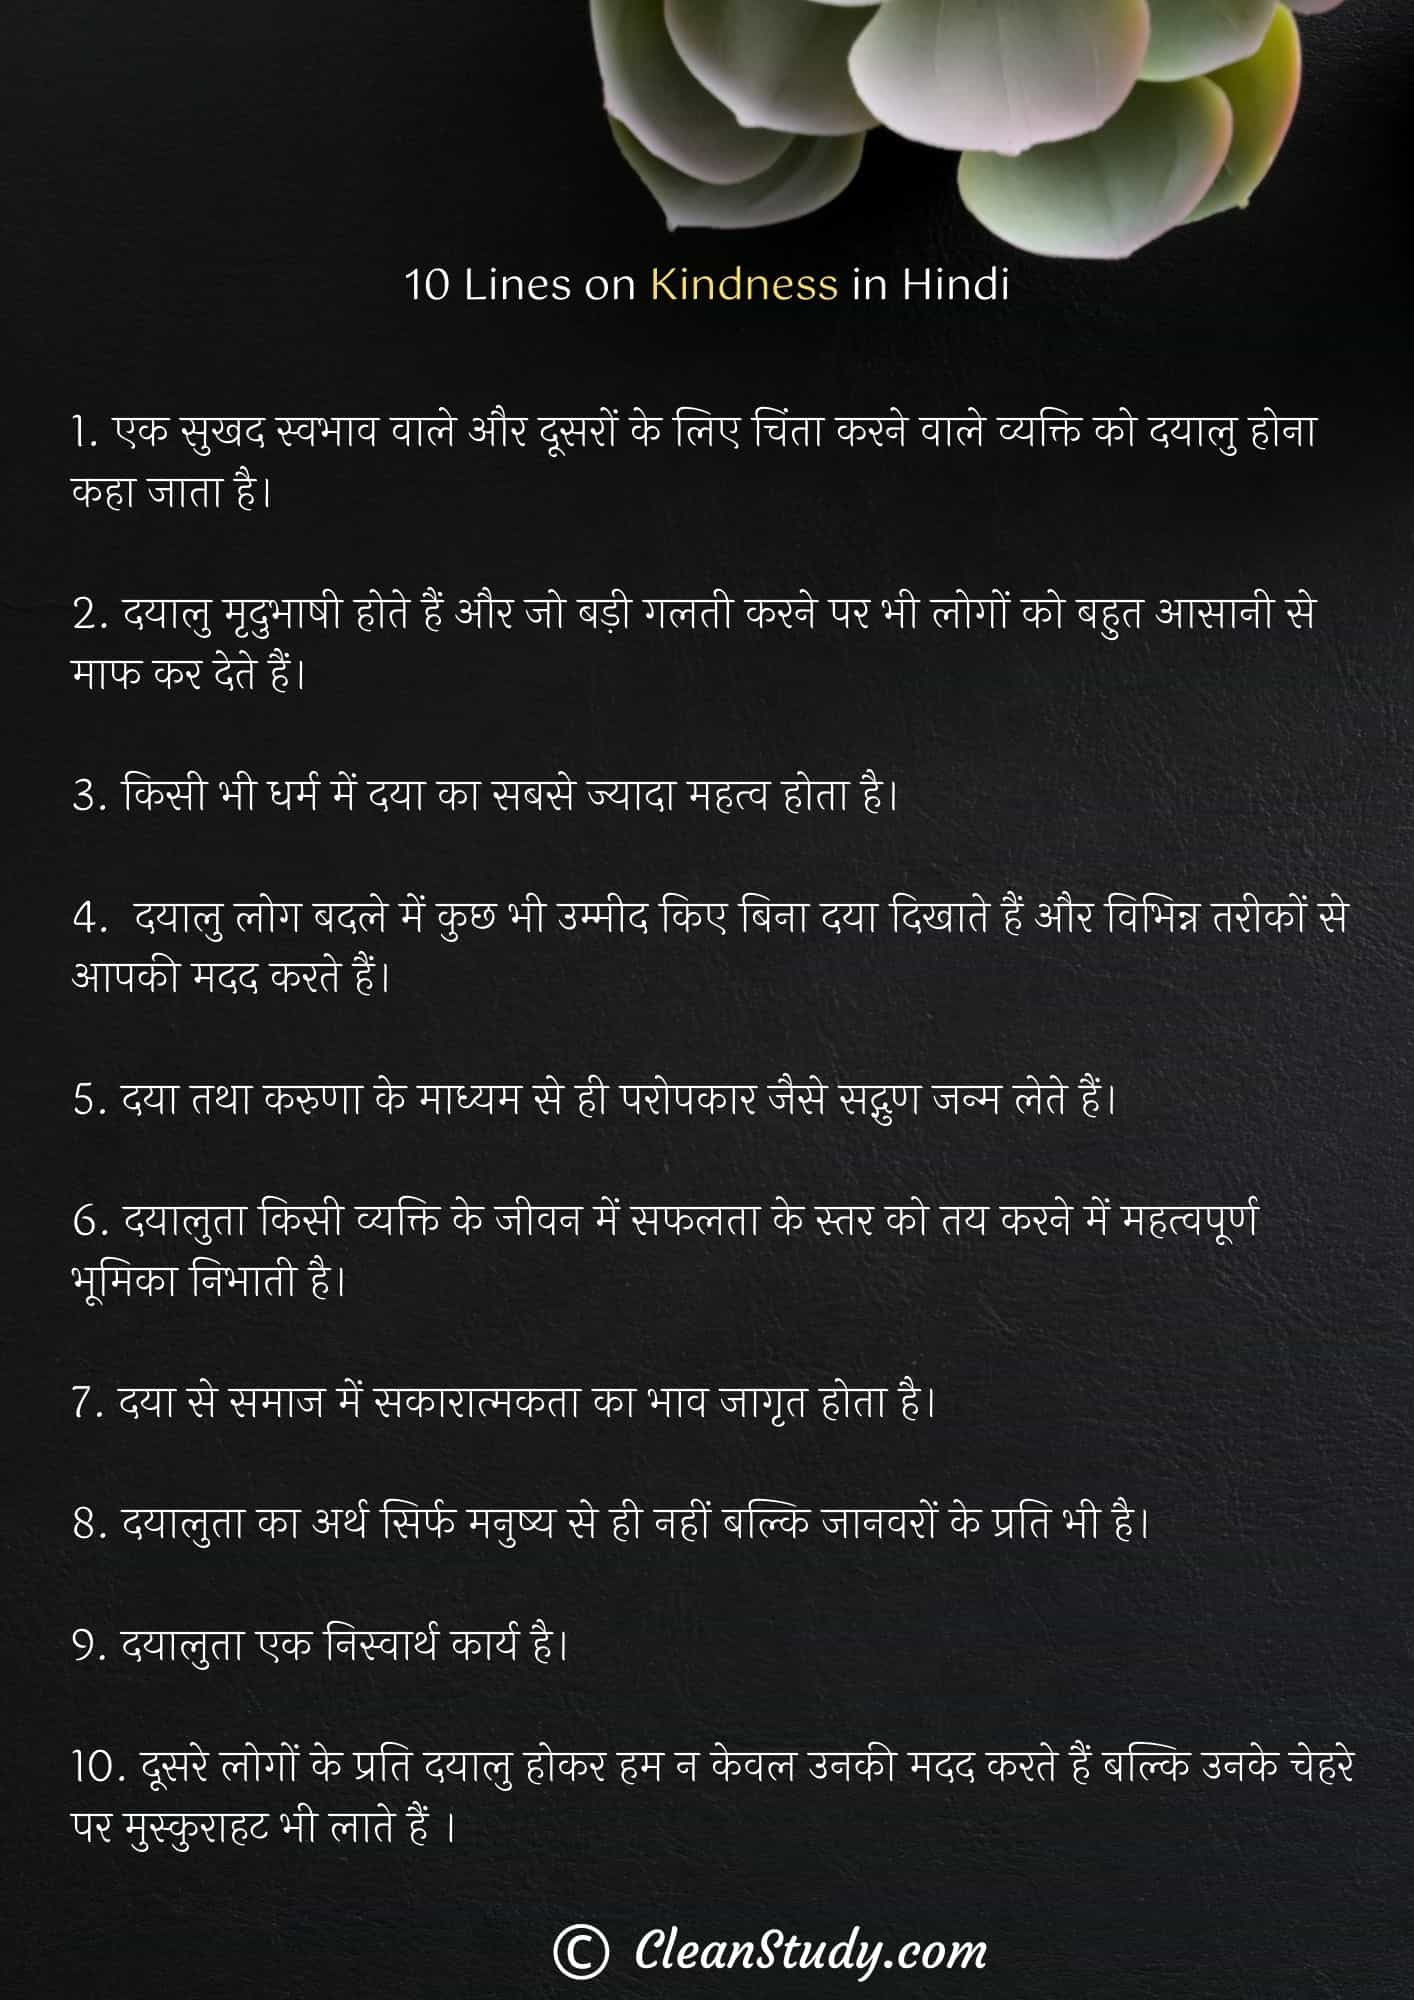 10 Lines on Kindness in Hindi